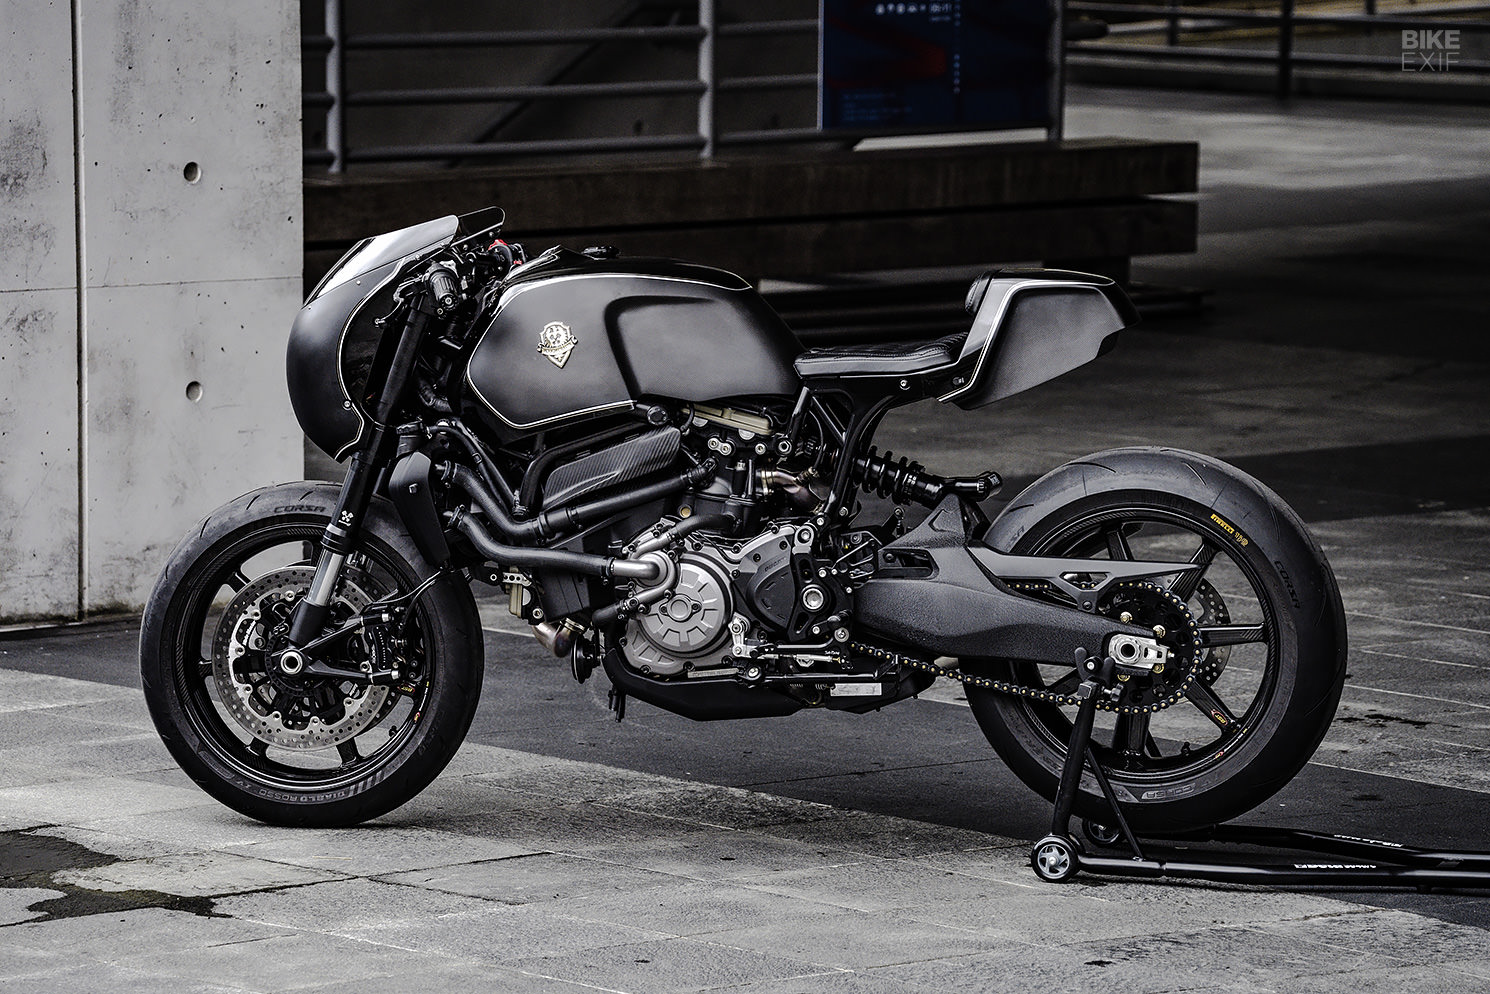 The New Black: A Ducati Monster 821 by Rough Crafts